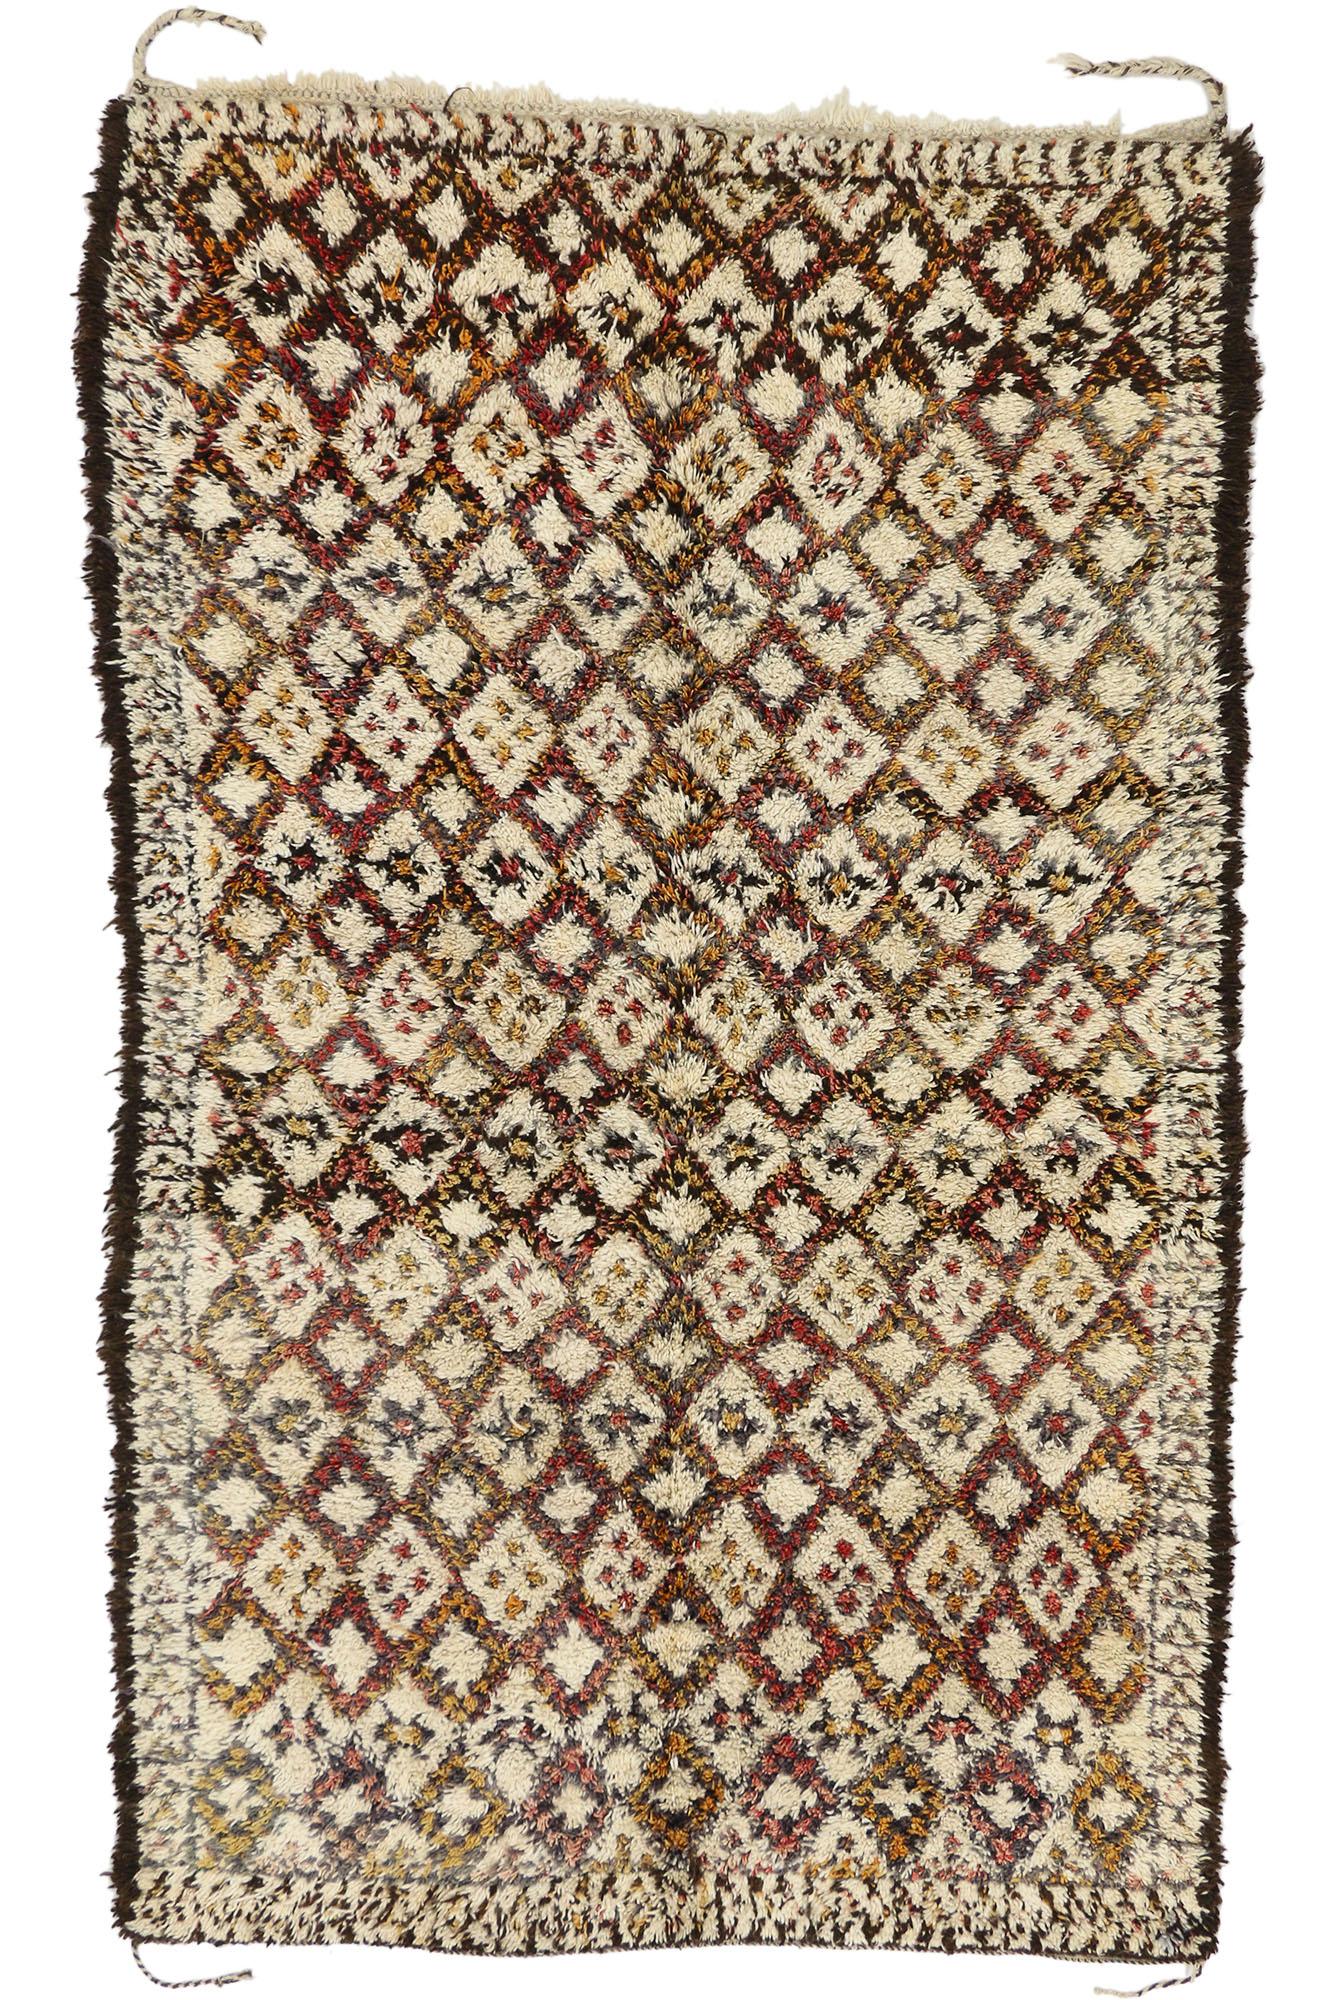 Vintage Moroccan Beni Ourain Rug, Warm Worldy Charm Meets Midcentury Modern For Sale 1